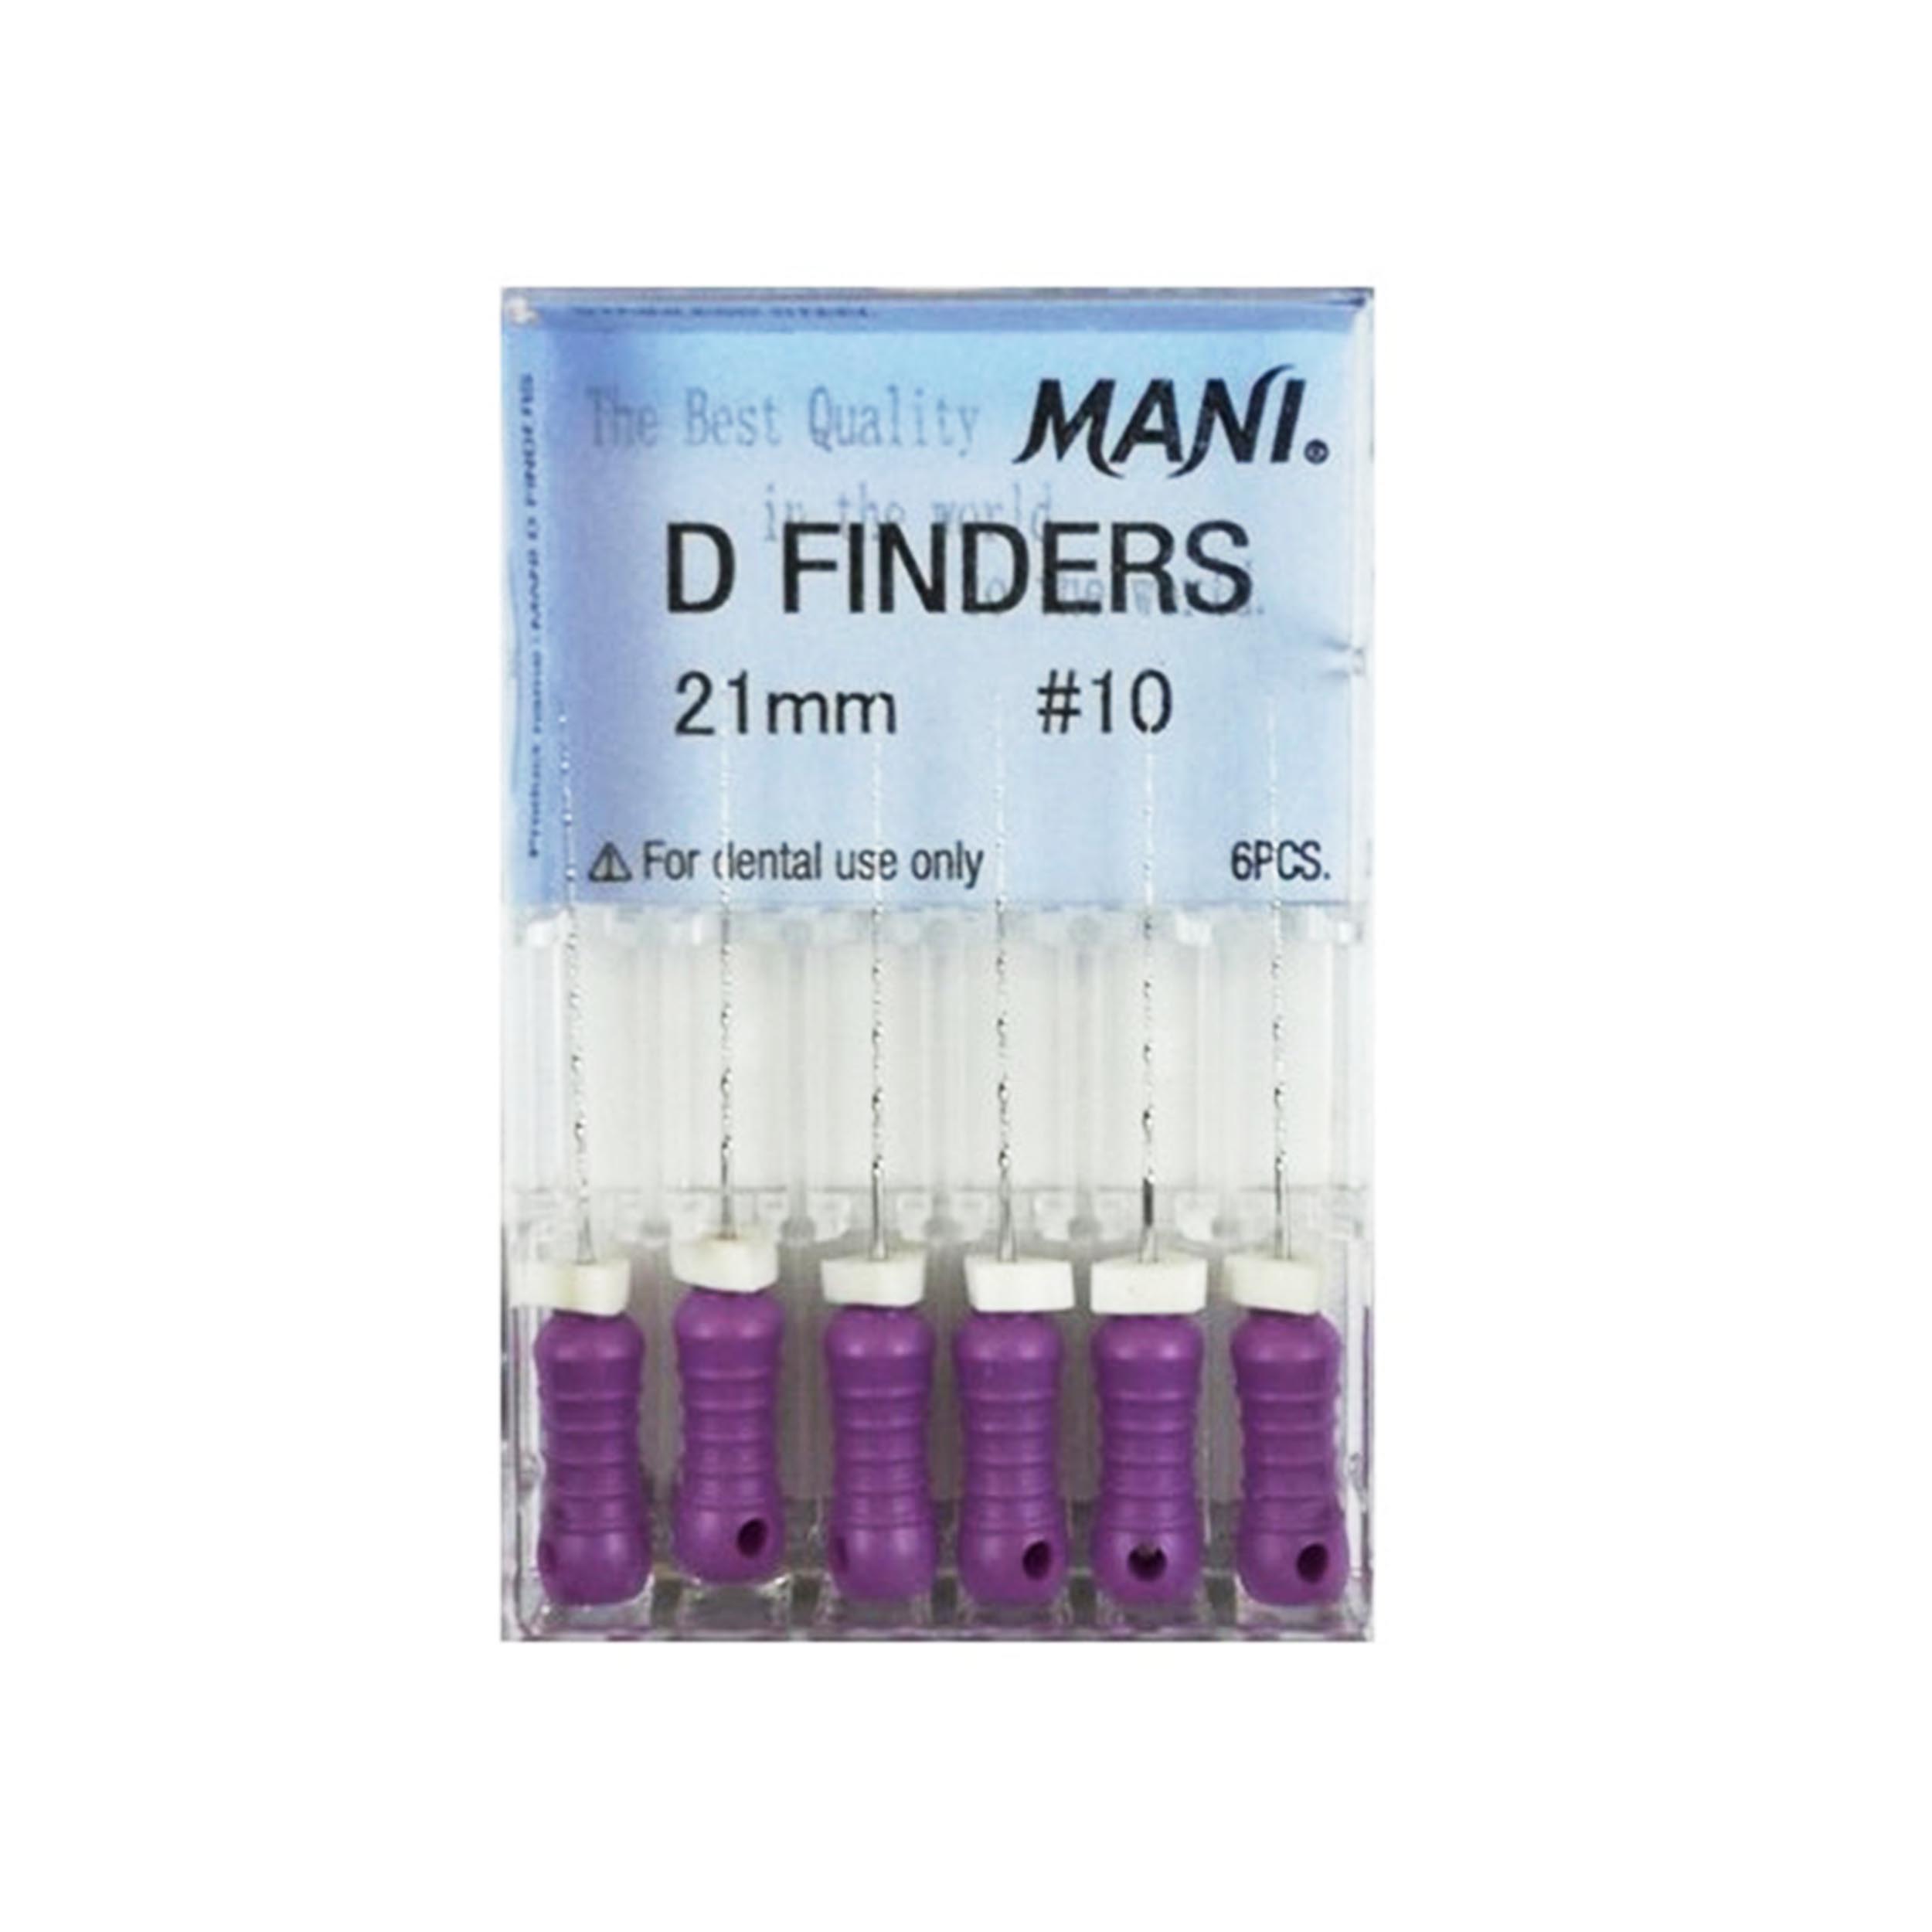 Mani D Finder Root Canal Files 10 (25mm)